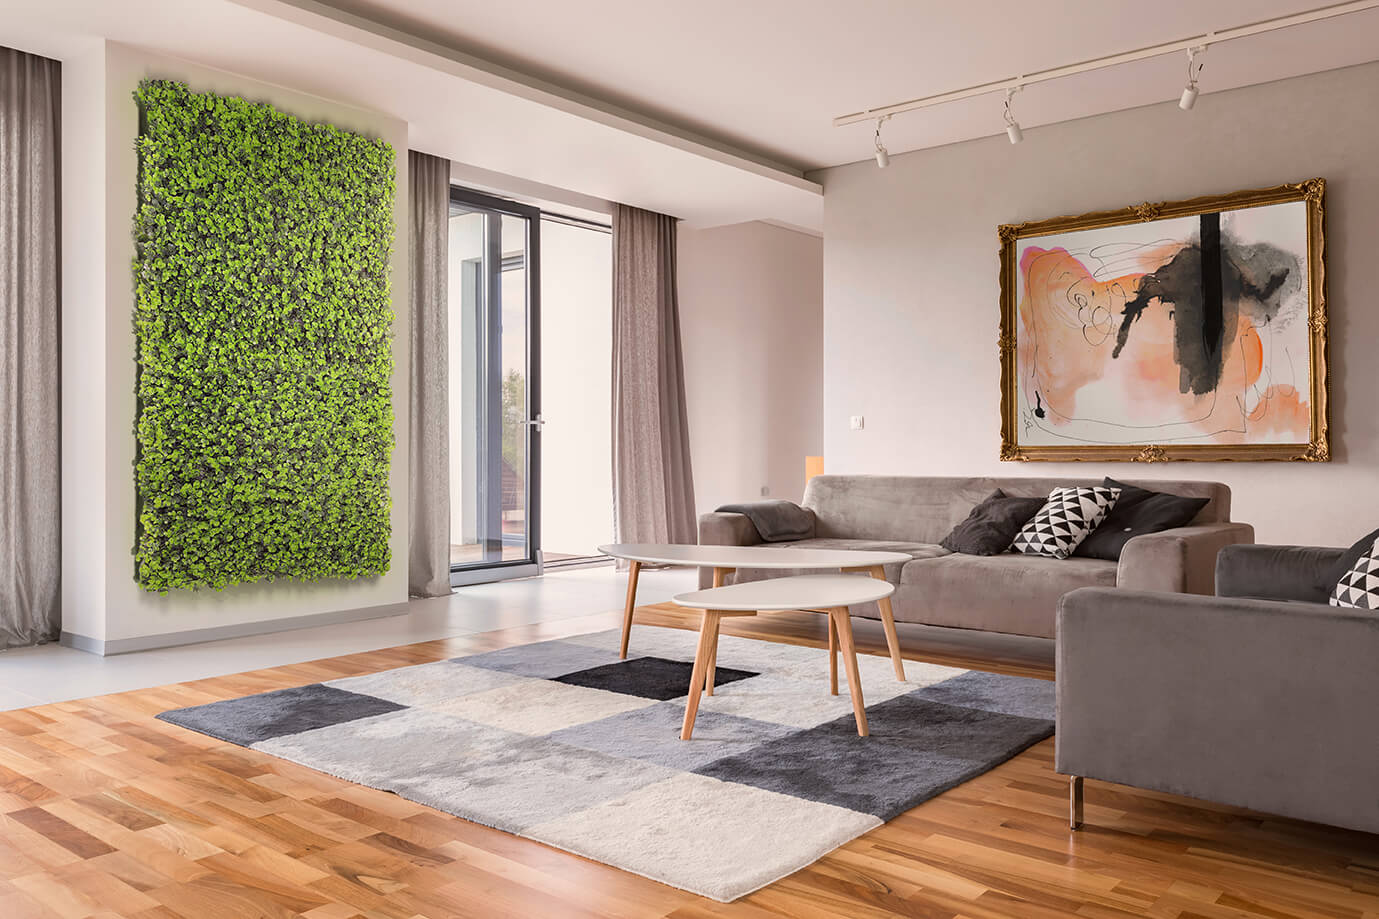 Plant wall in living room with modern furniture